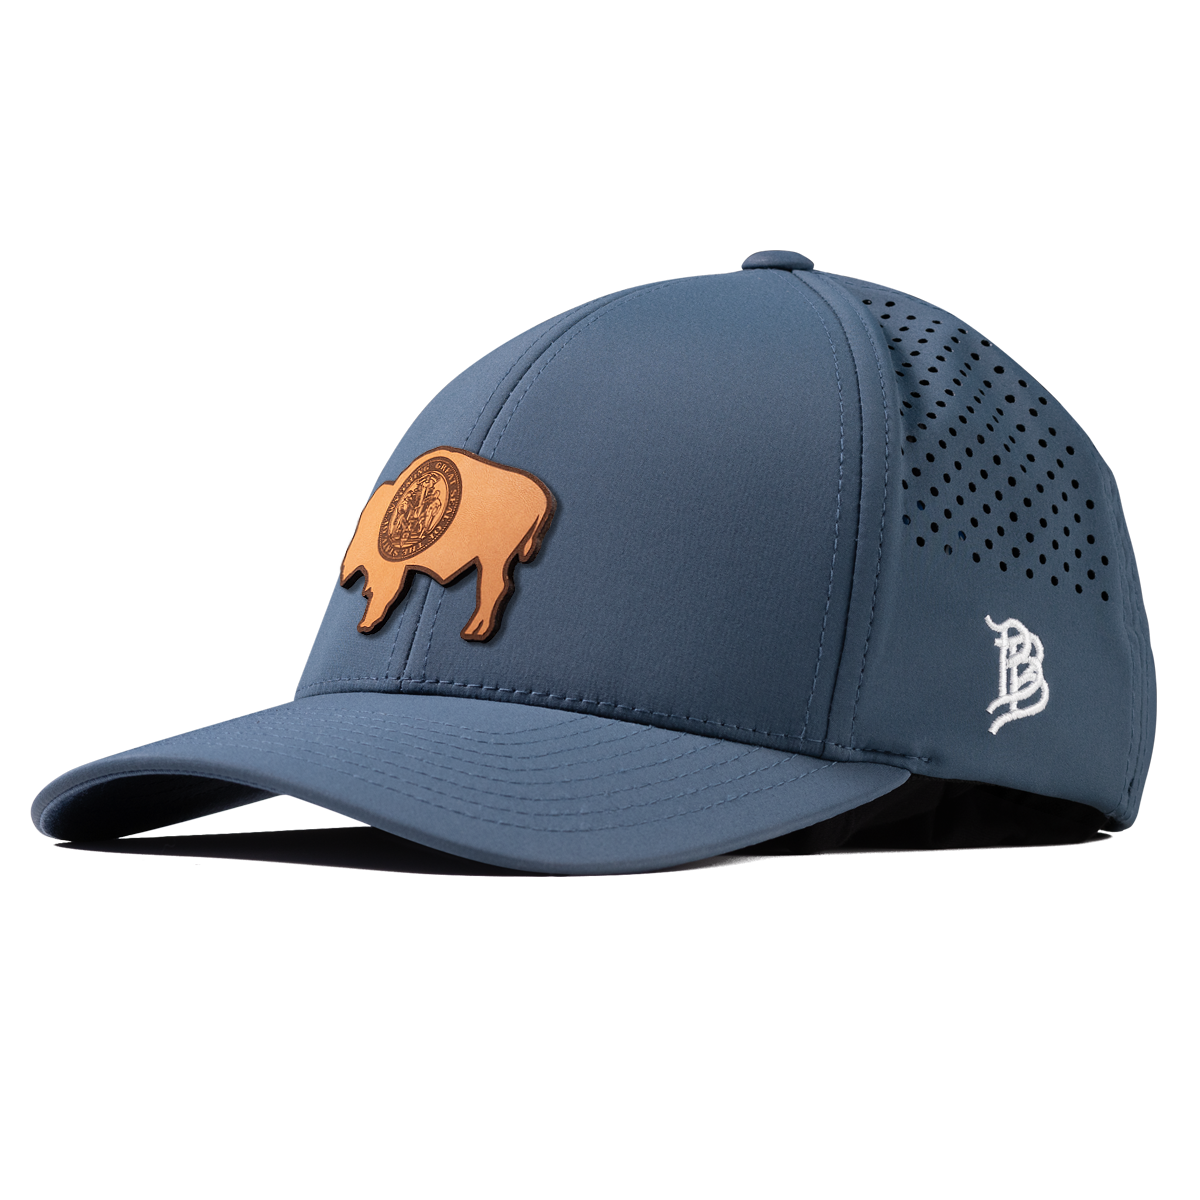 Wyoming 44 Curved Performance Navy